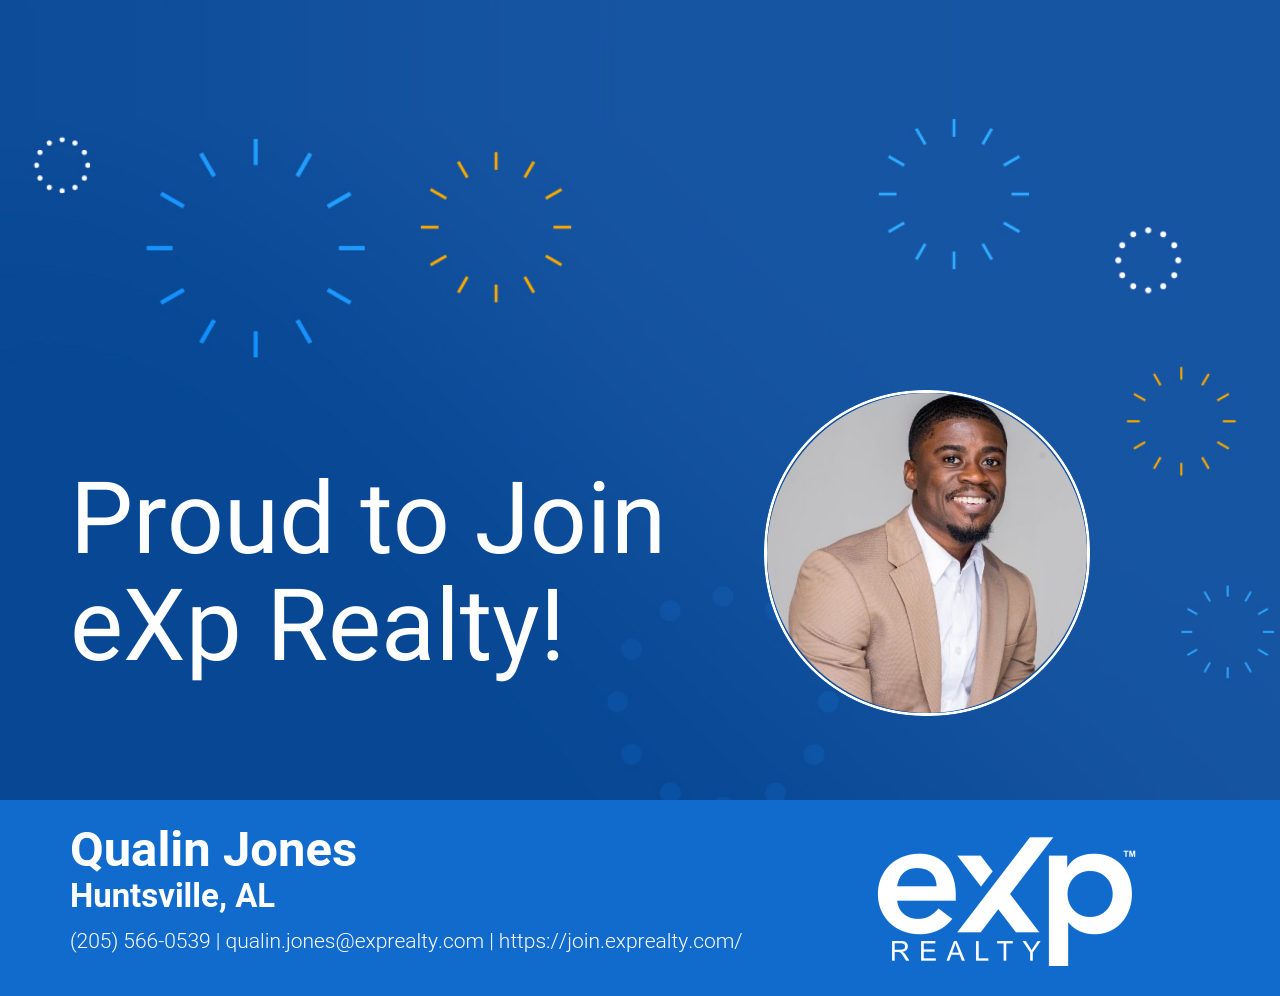 Qualin Jones Joined eXp Realty!